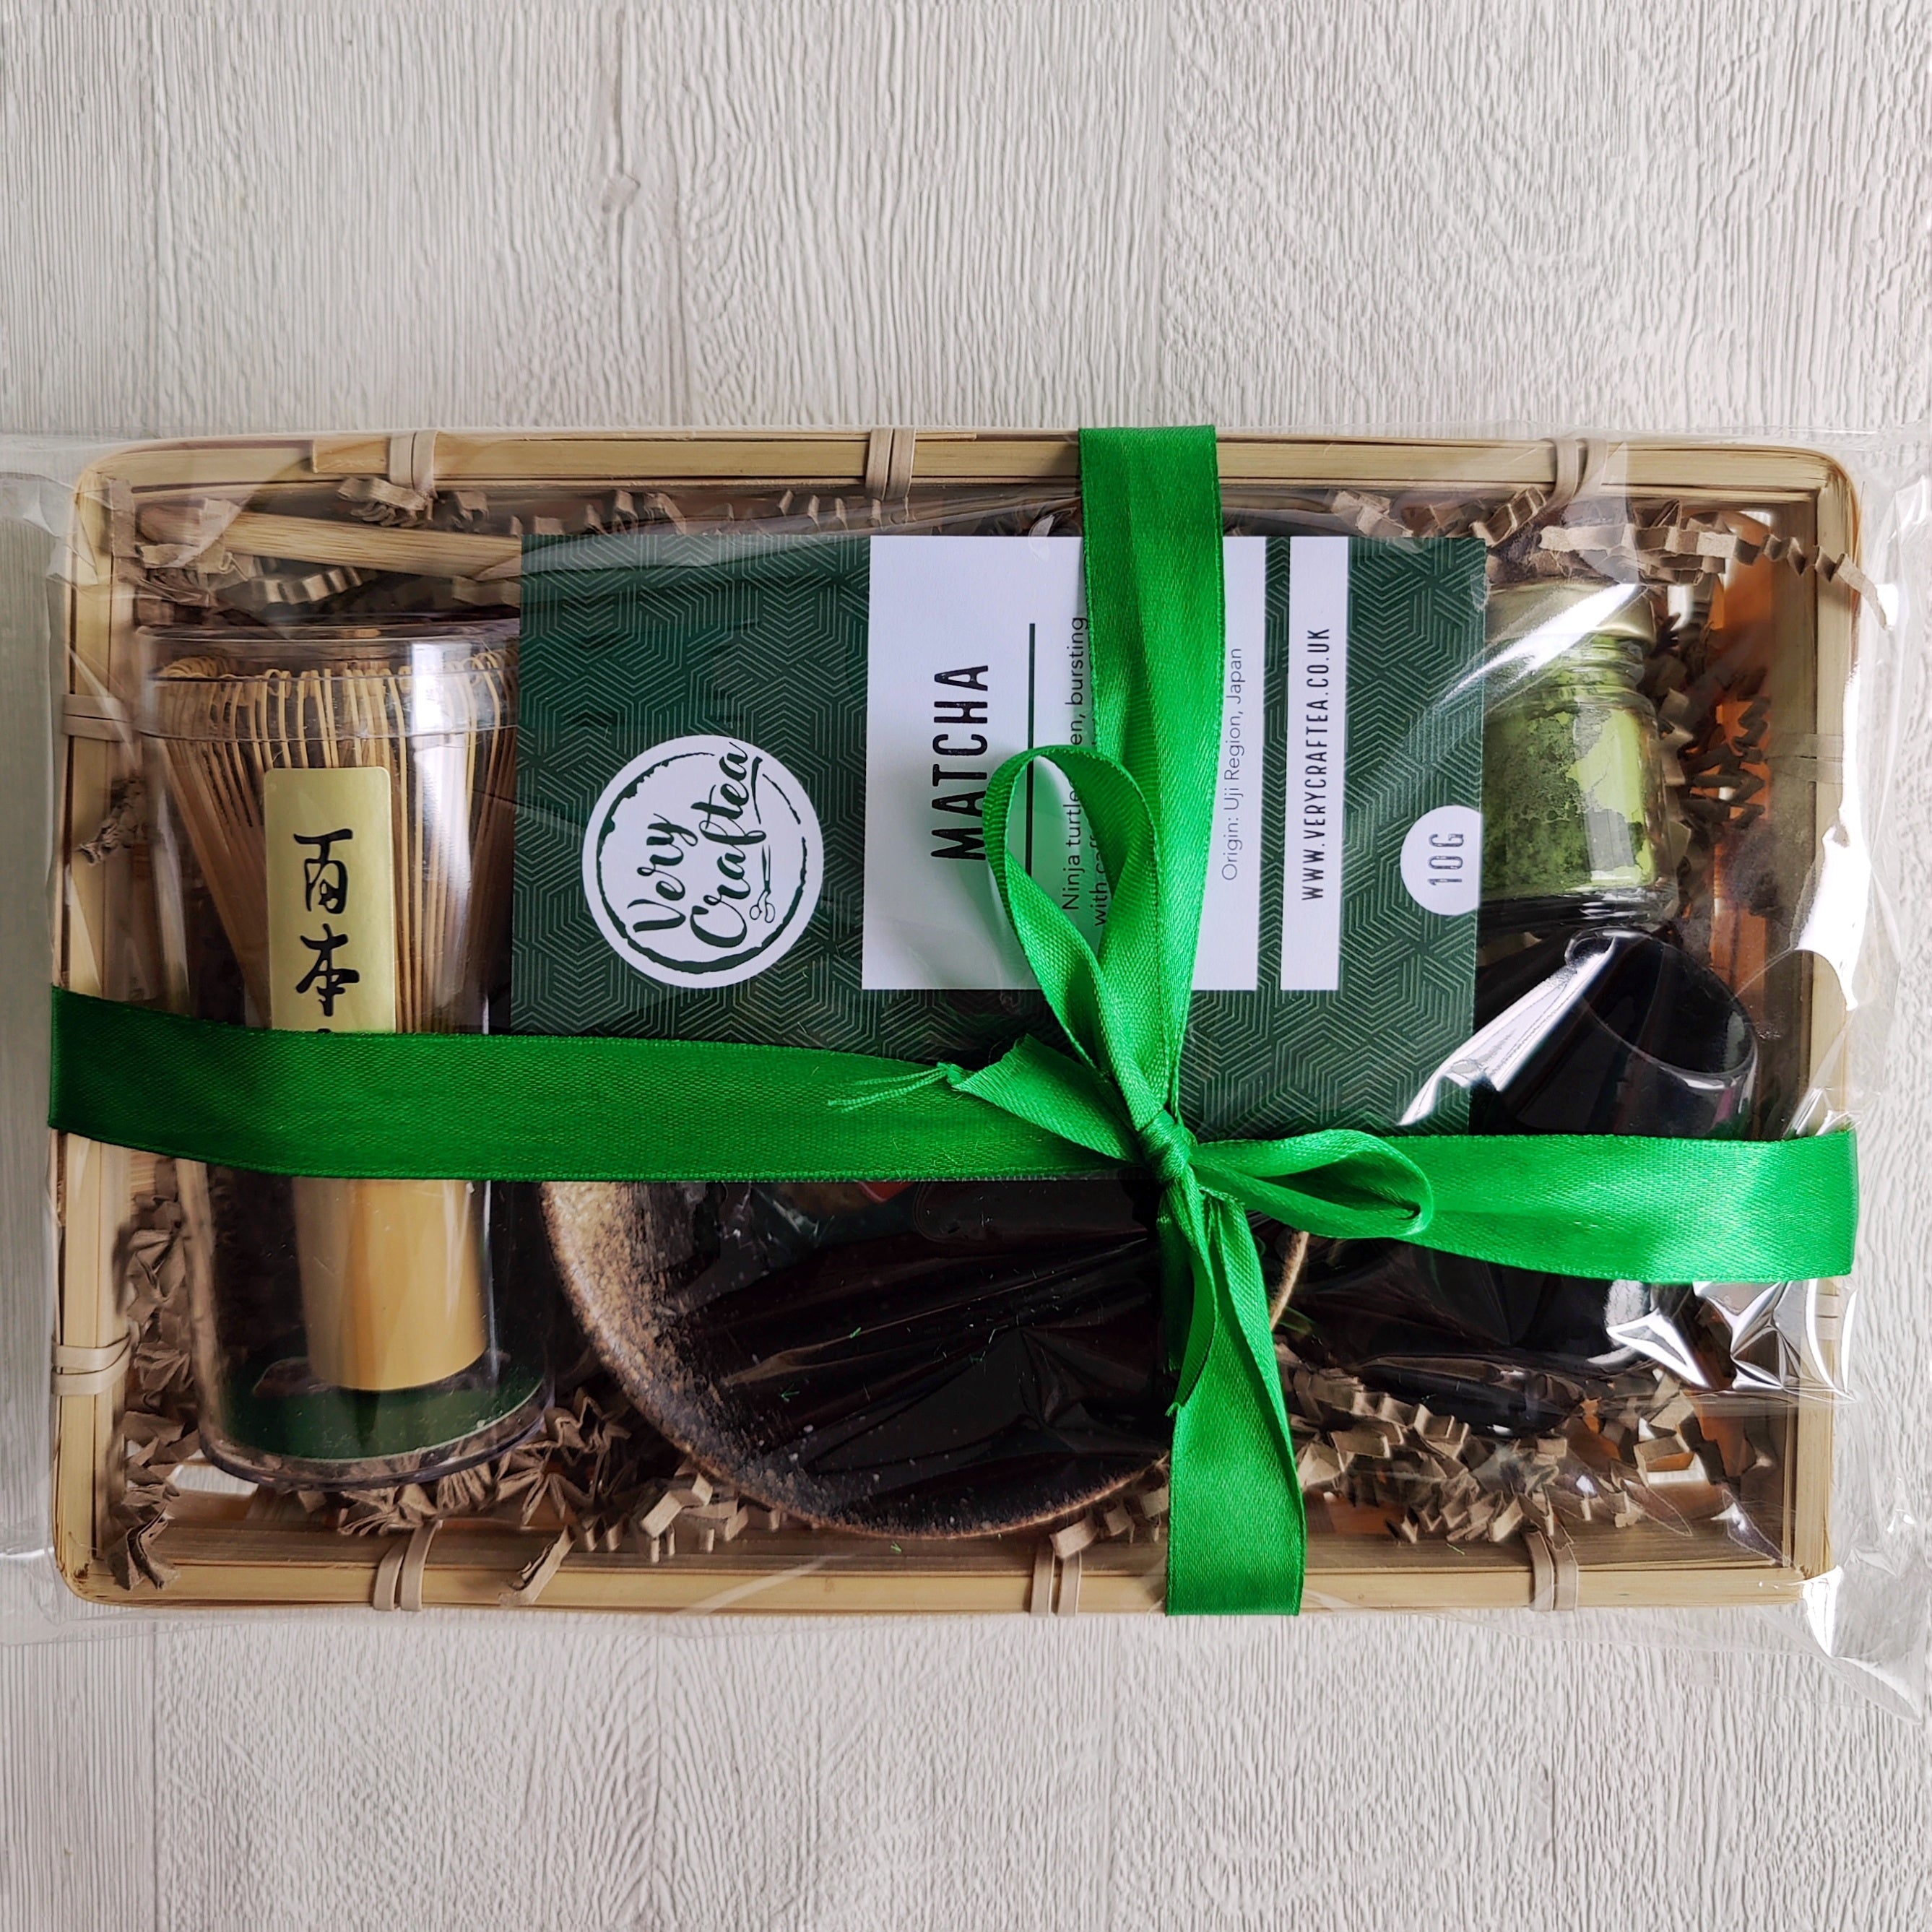 Wrapped Matcha Green Tea Gift Set in Bamboo Tray with Bamboo Whisk, Bamboo Scoop, Jar of Matcha and Whisk Holder from Very Craftea